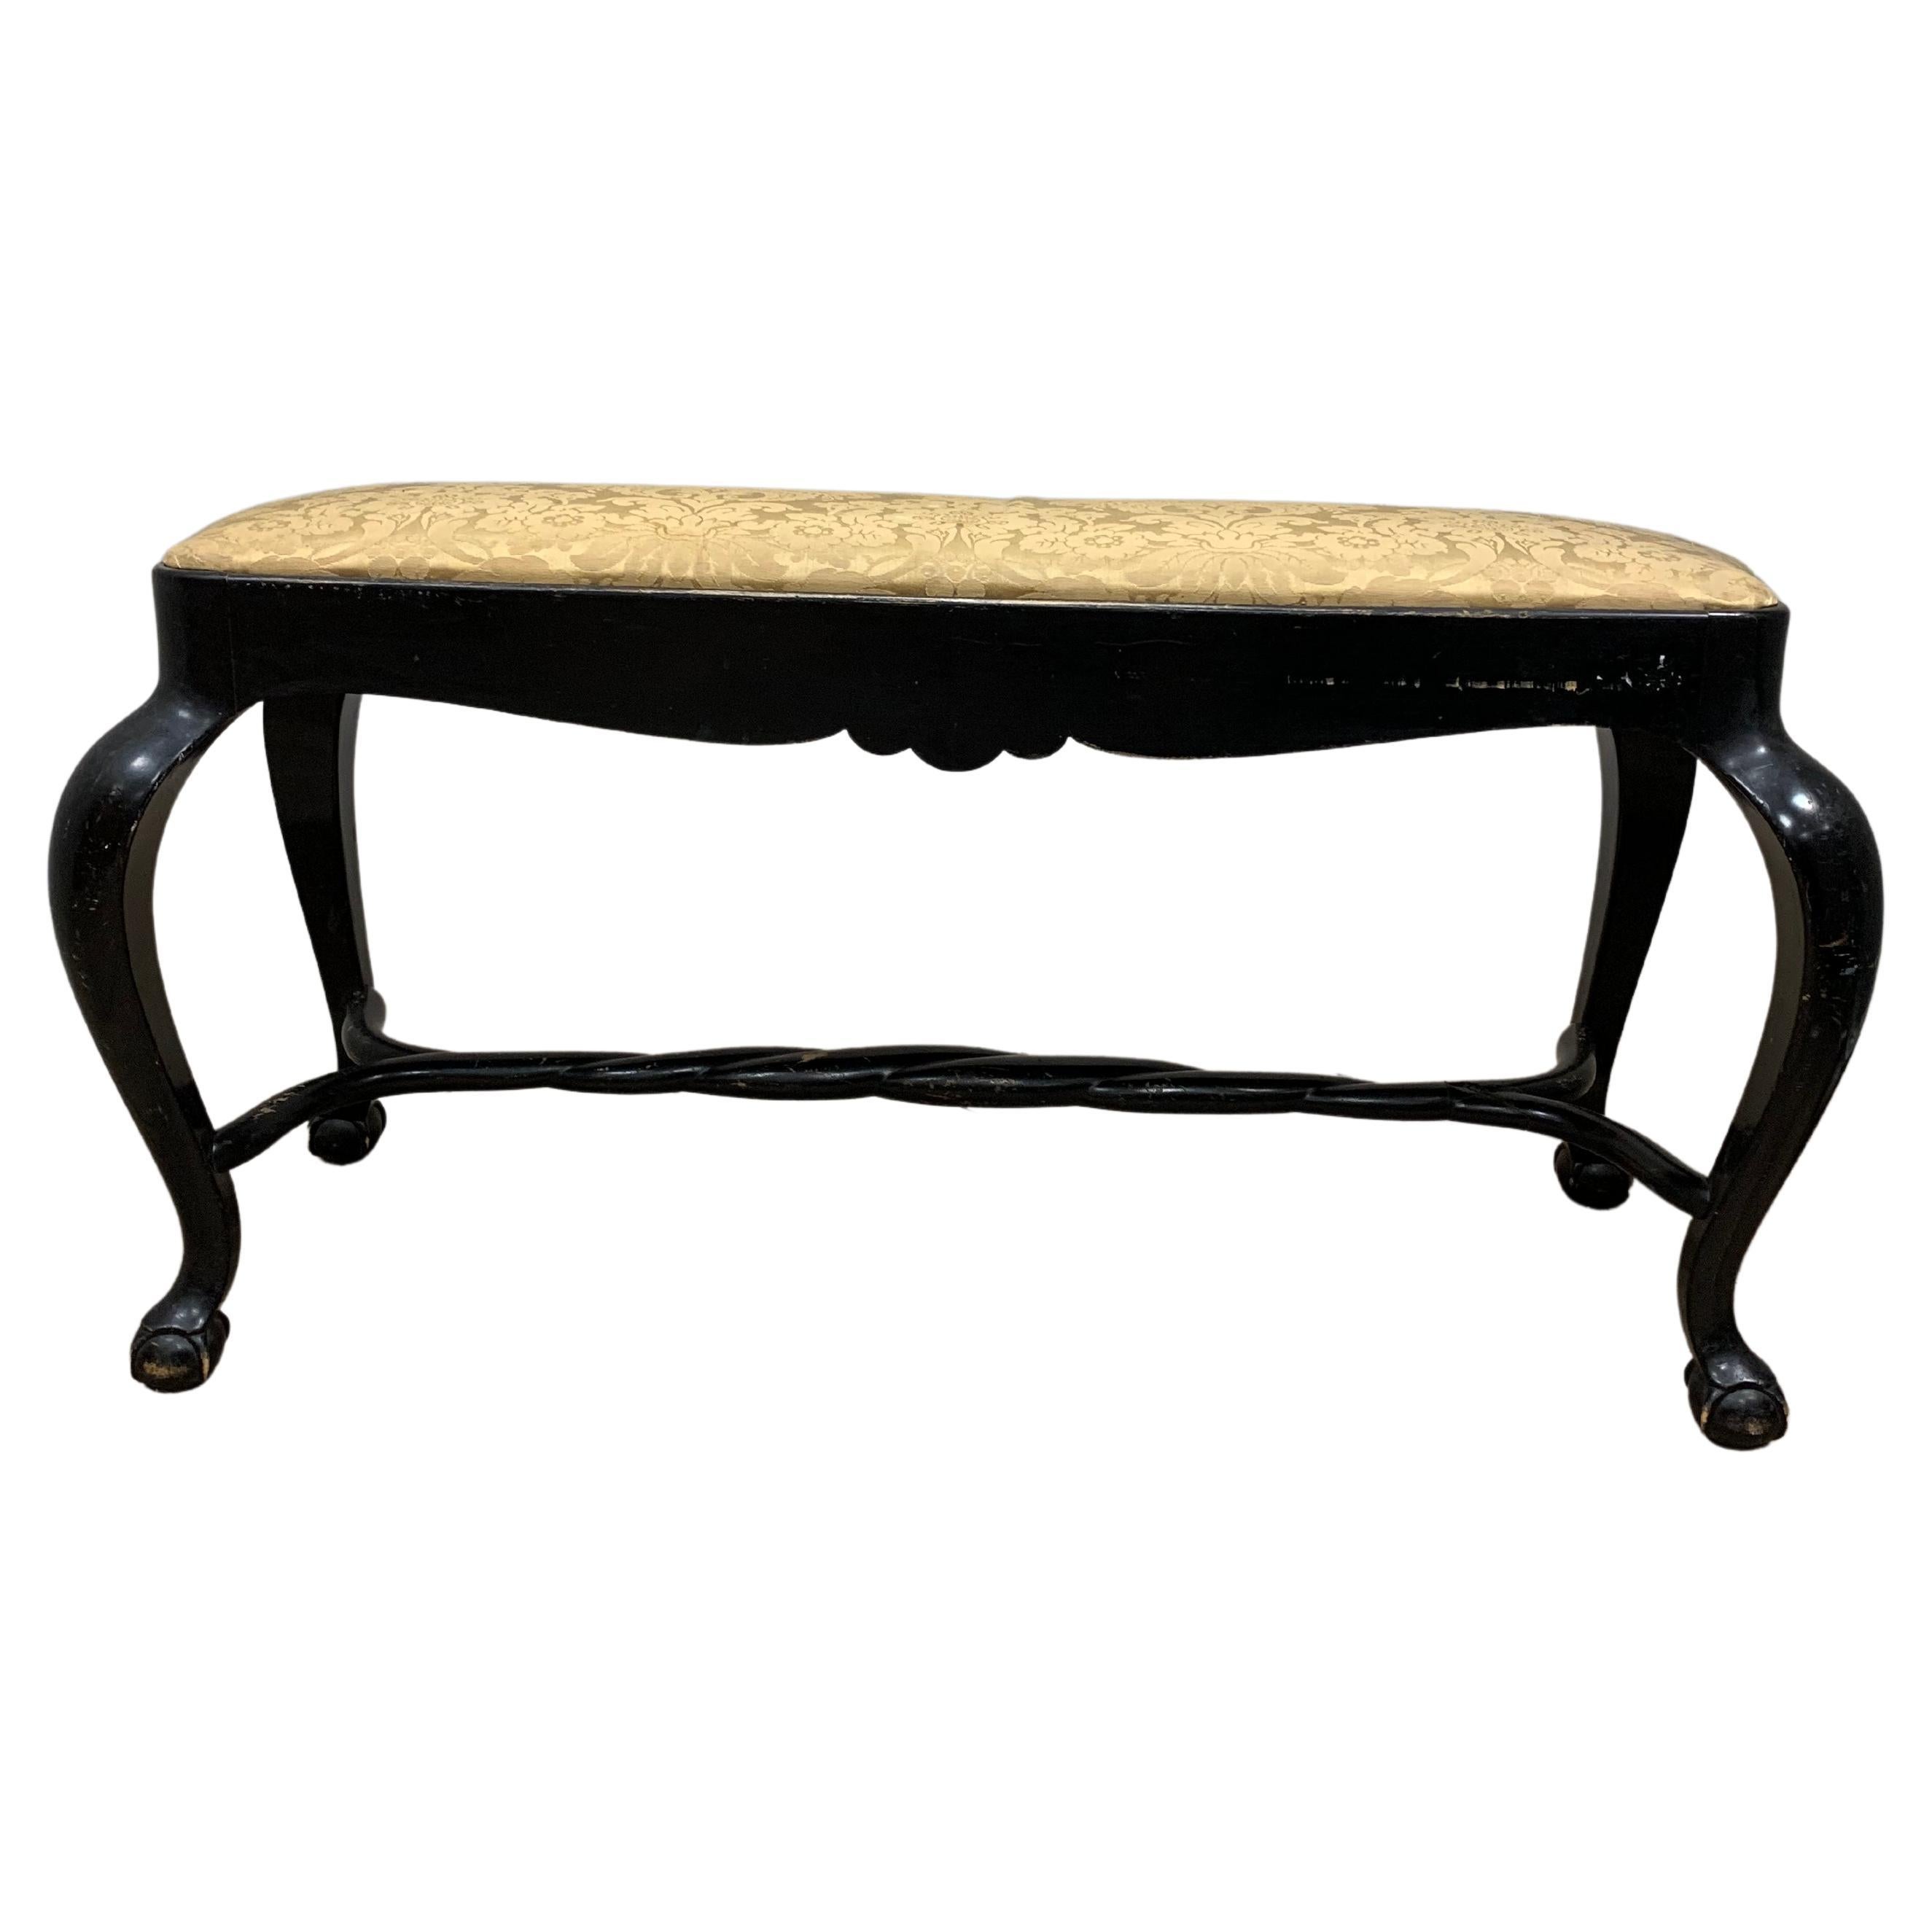 1920s Ebonised Baroque Style Swedish Stool or Bench with Ball & Claw Feet